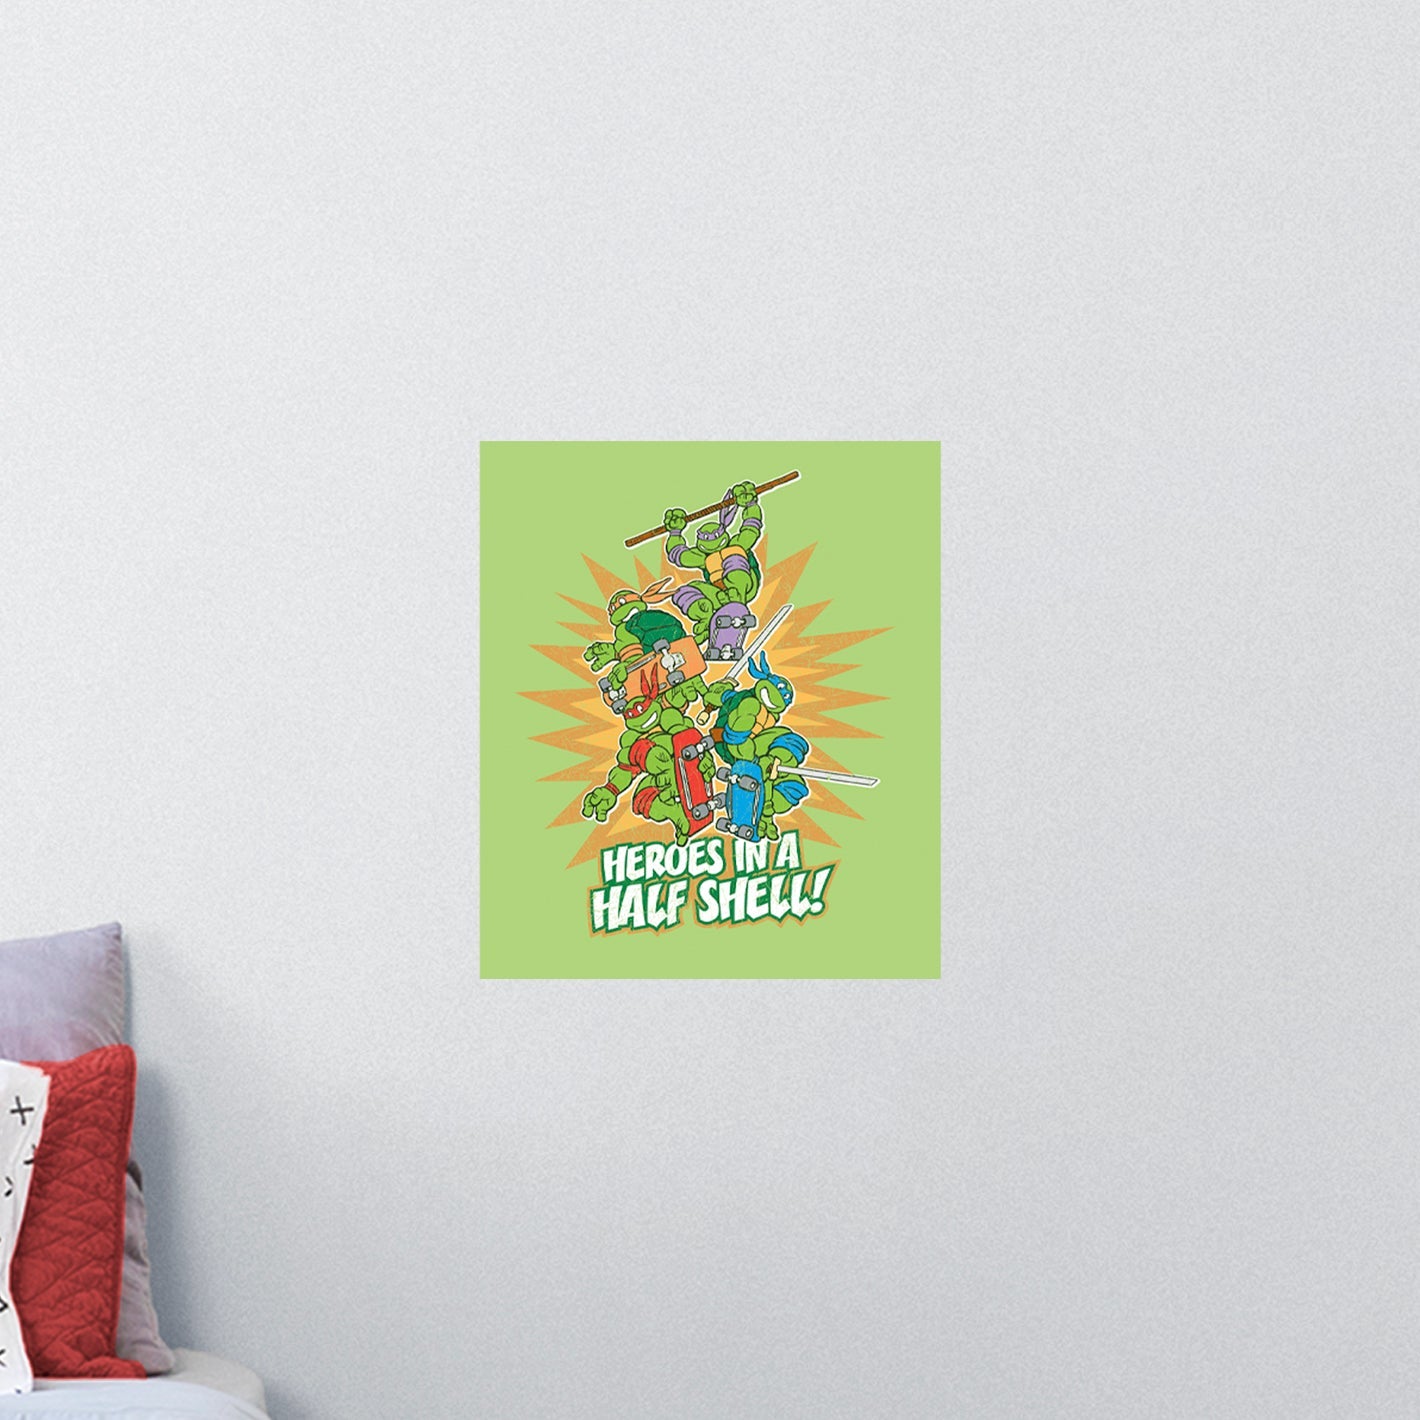 Teenage Mutant Ninja Turtles: Heroes in a Half Shell Poster - Officially Licensed Nickelodeon Removable Adhesive Decal